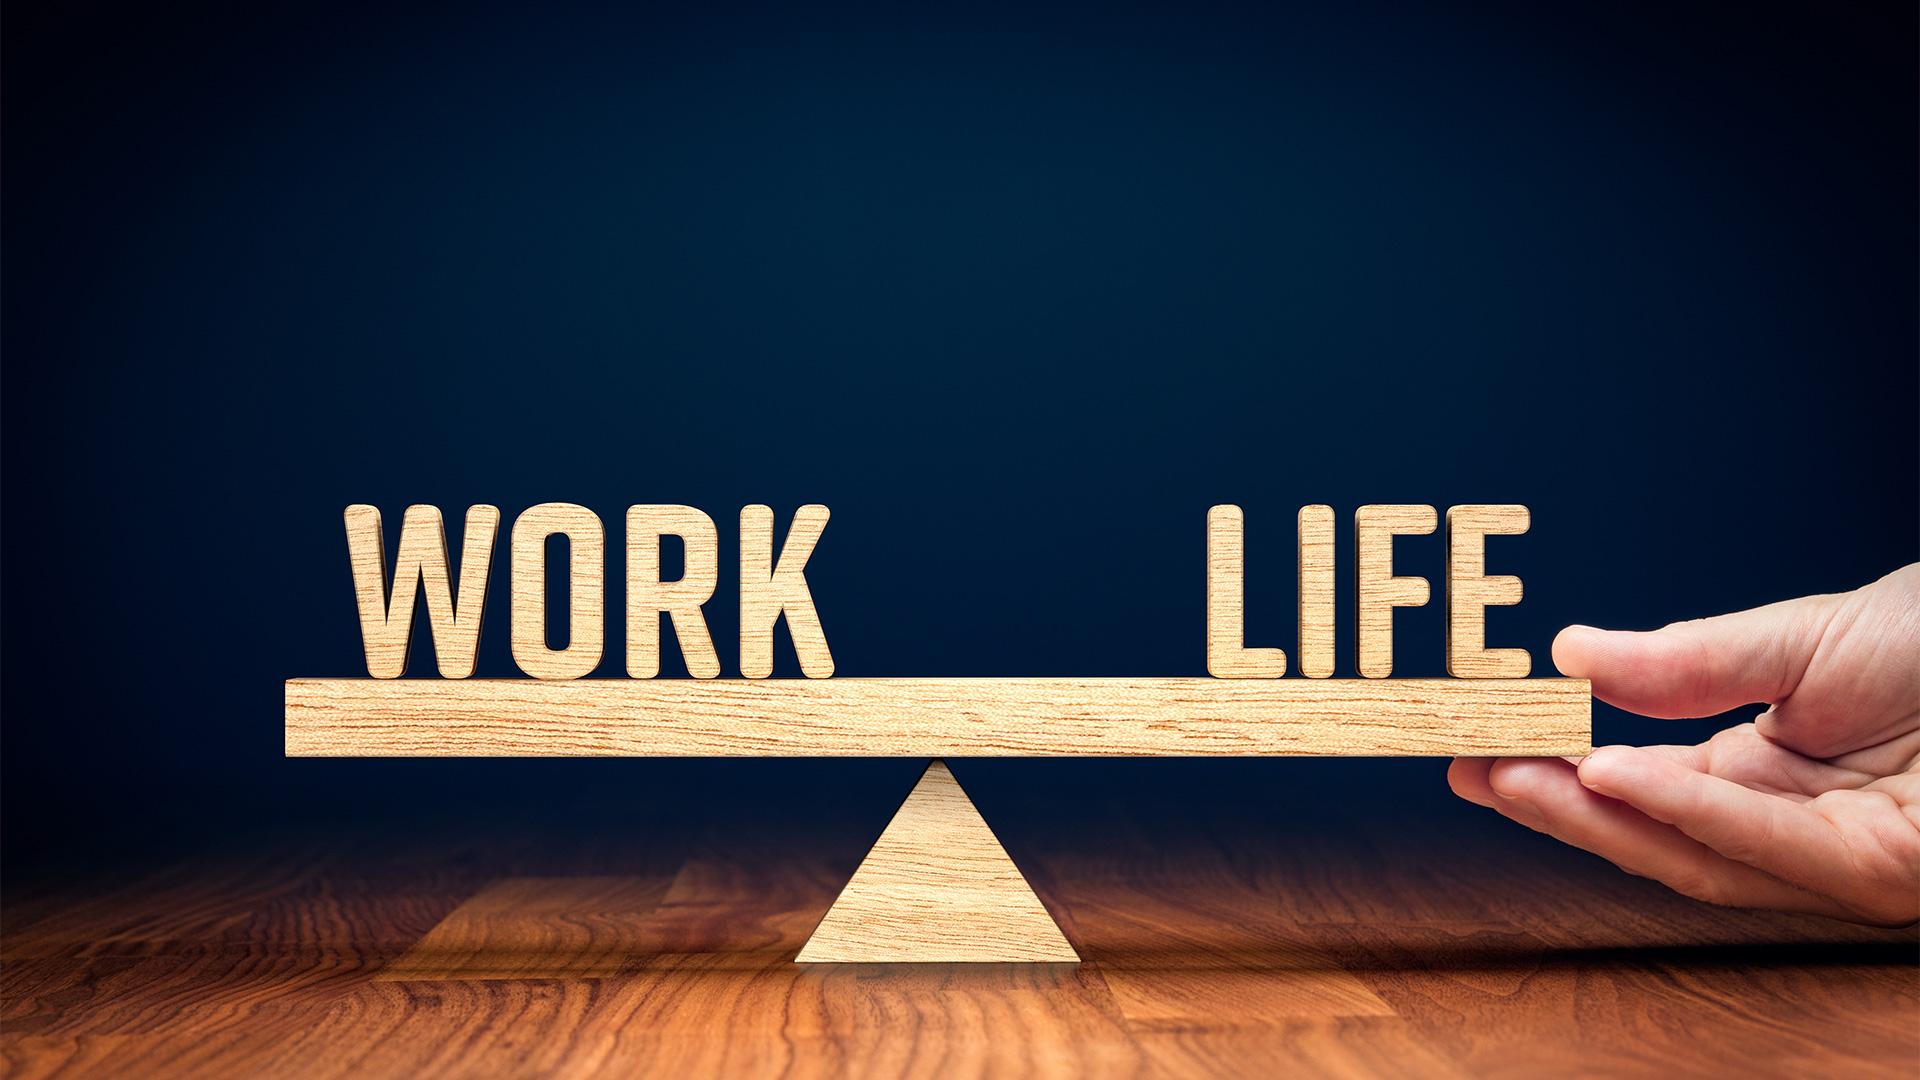 A wooden scale holds the words "work" and "life" on either side